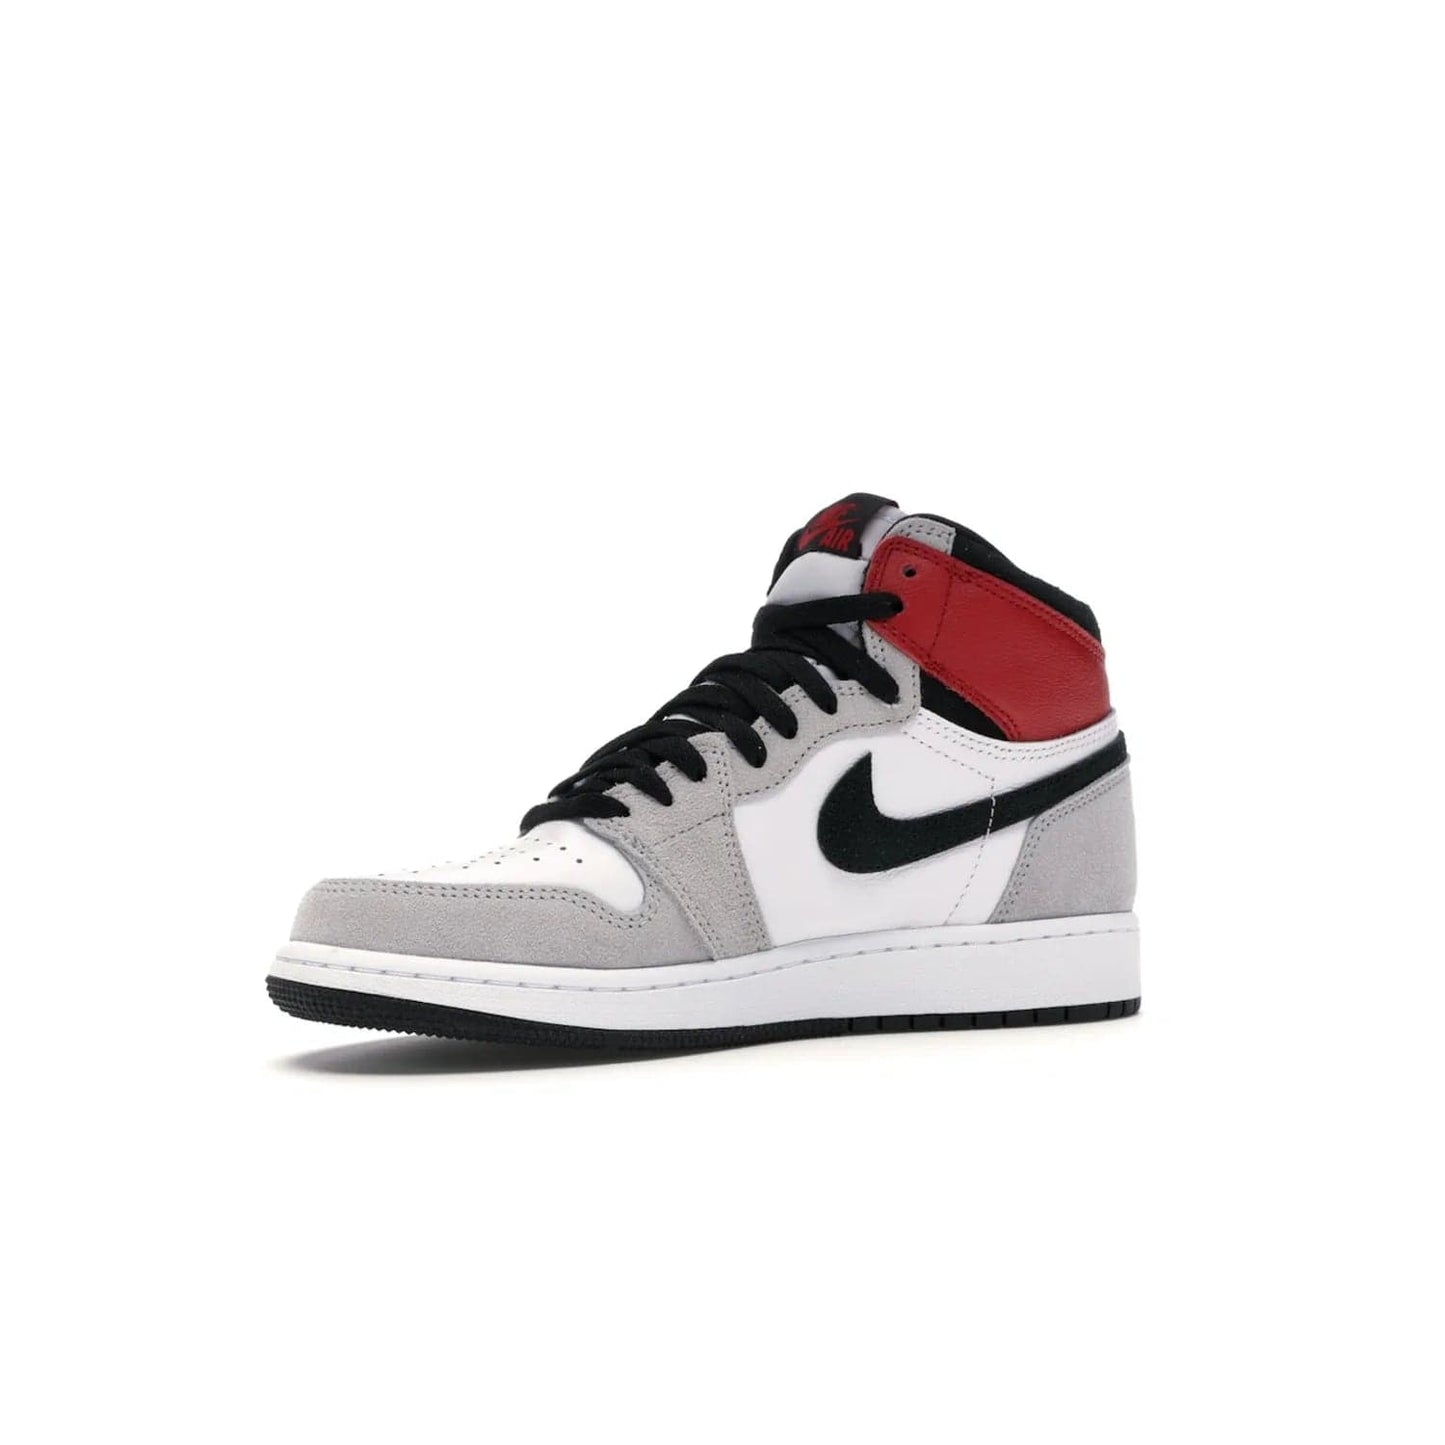 Jordan 1 Retro High Light Smoke Grey (GS) - Image 16 - Only at www.BallersClubKickz.com - Jordan 1 Retro High Light Smoke Grey (GS) features shades of grey, black, and Varsity Red with a bold silhouette. Premium white leather and suede overlays create a unique look. Released July 2020, offering style and performance. Perfect sneaker for any collector or fan.